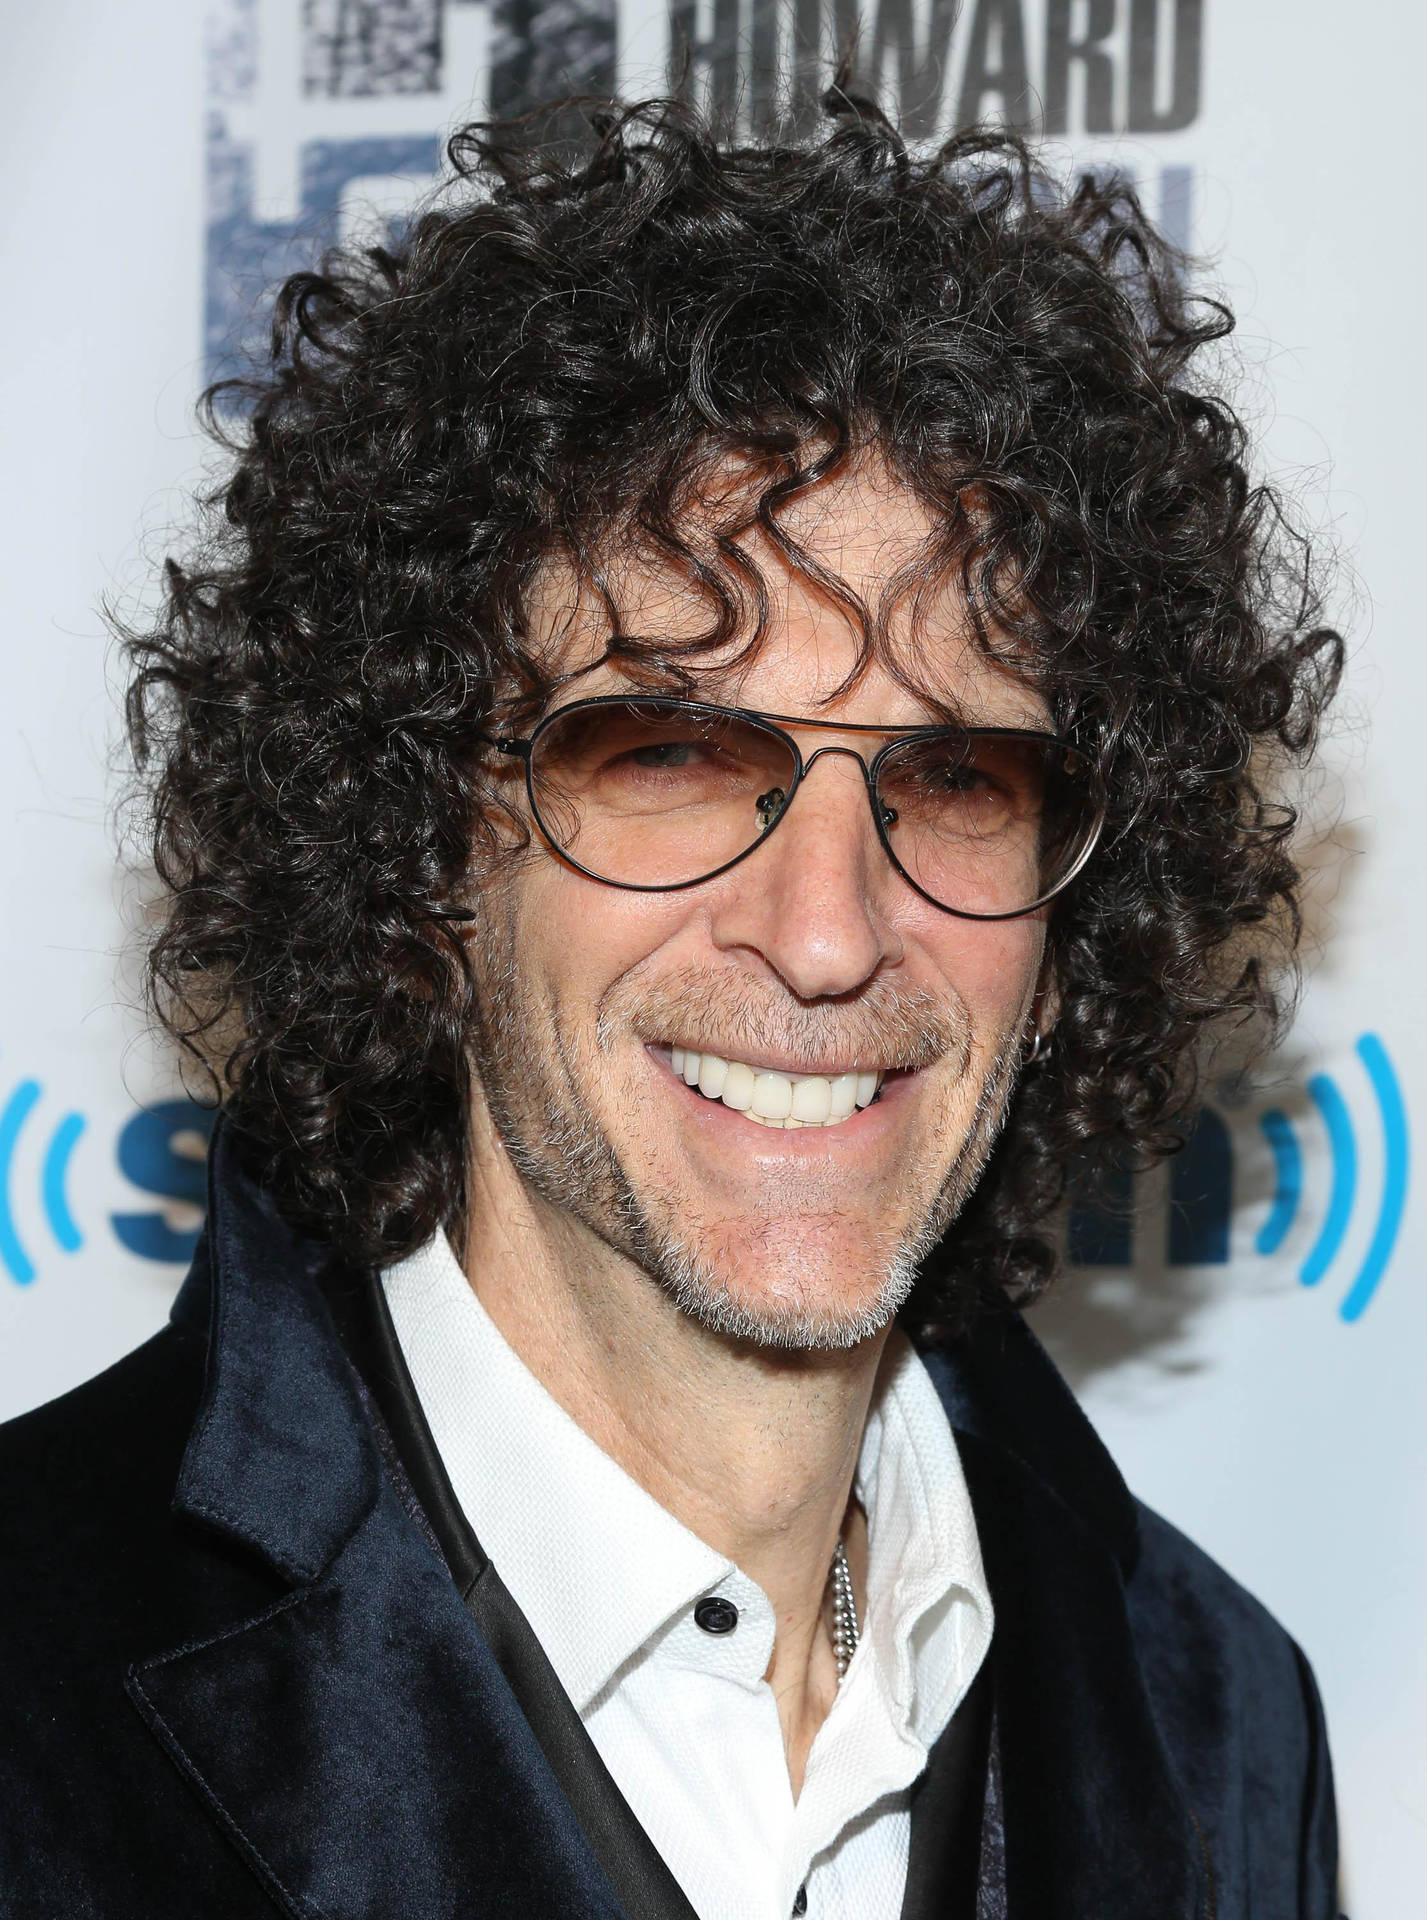 Howardstern Lockigt Hår (for A Computer Or Mobile Wallpaper Featuring A Photo Of Howard Stern With Curly Hair) Wallpaper